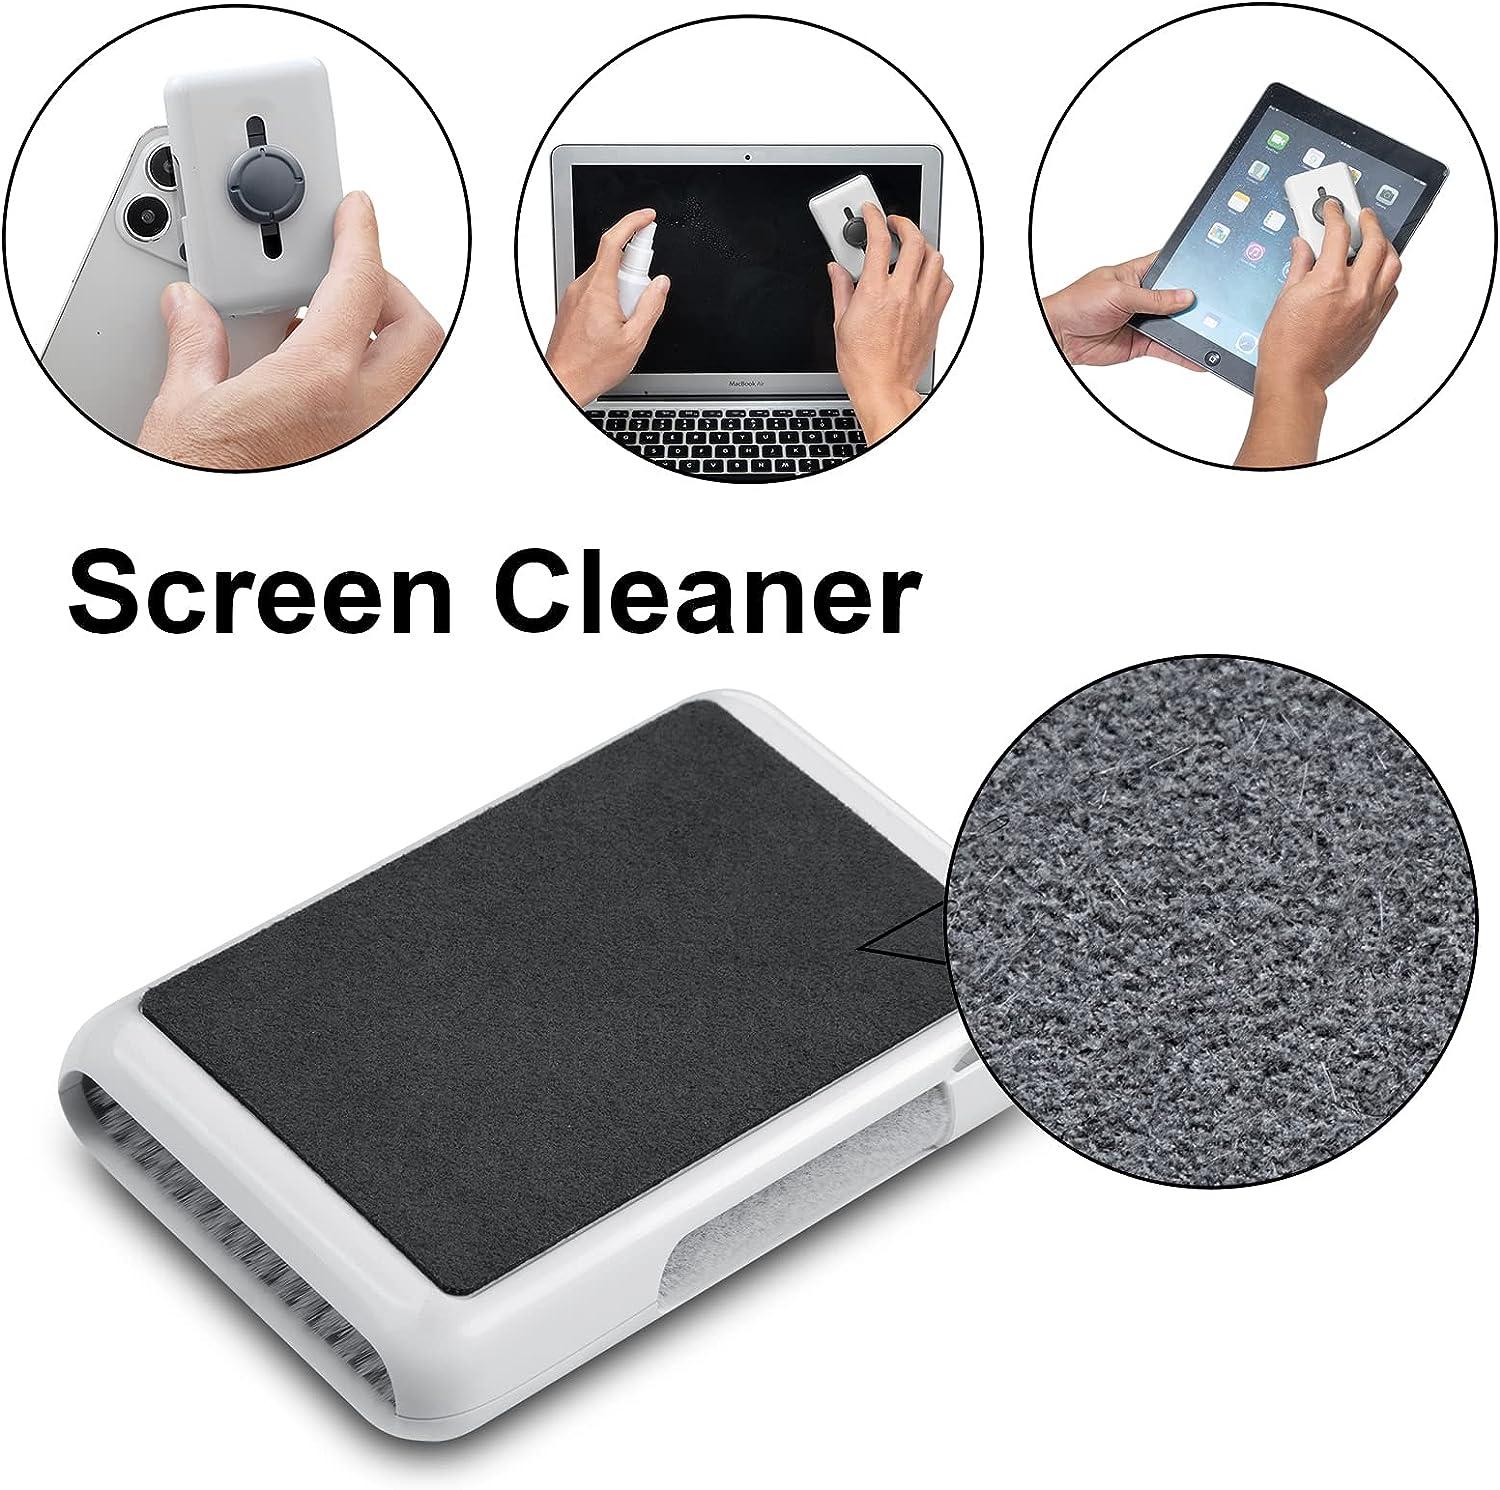 TSV 10-in-1 Electronic Equipment Cleaner Set Perfect for Laptops, PC,  Mechanical Keyboards, Cameras, Phones, Earbuds 